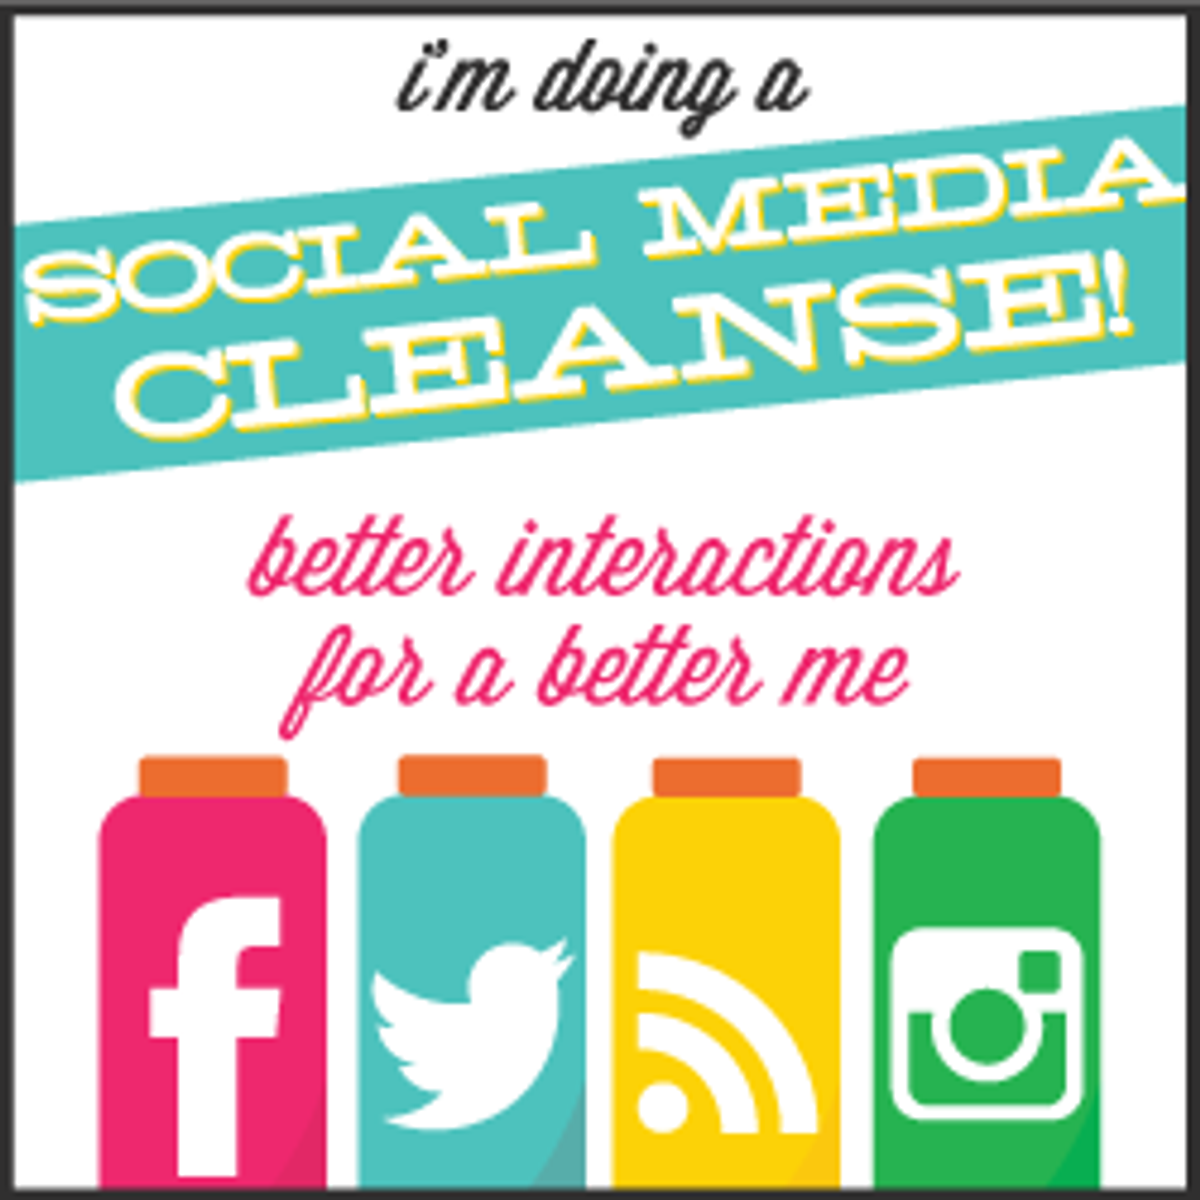 Why We All Need A Social Media Cleanse